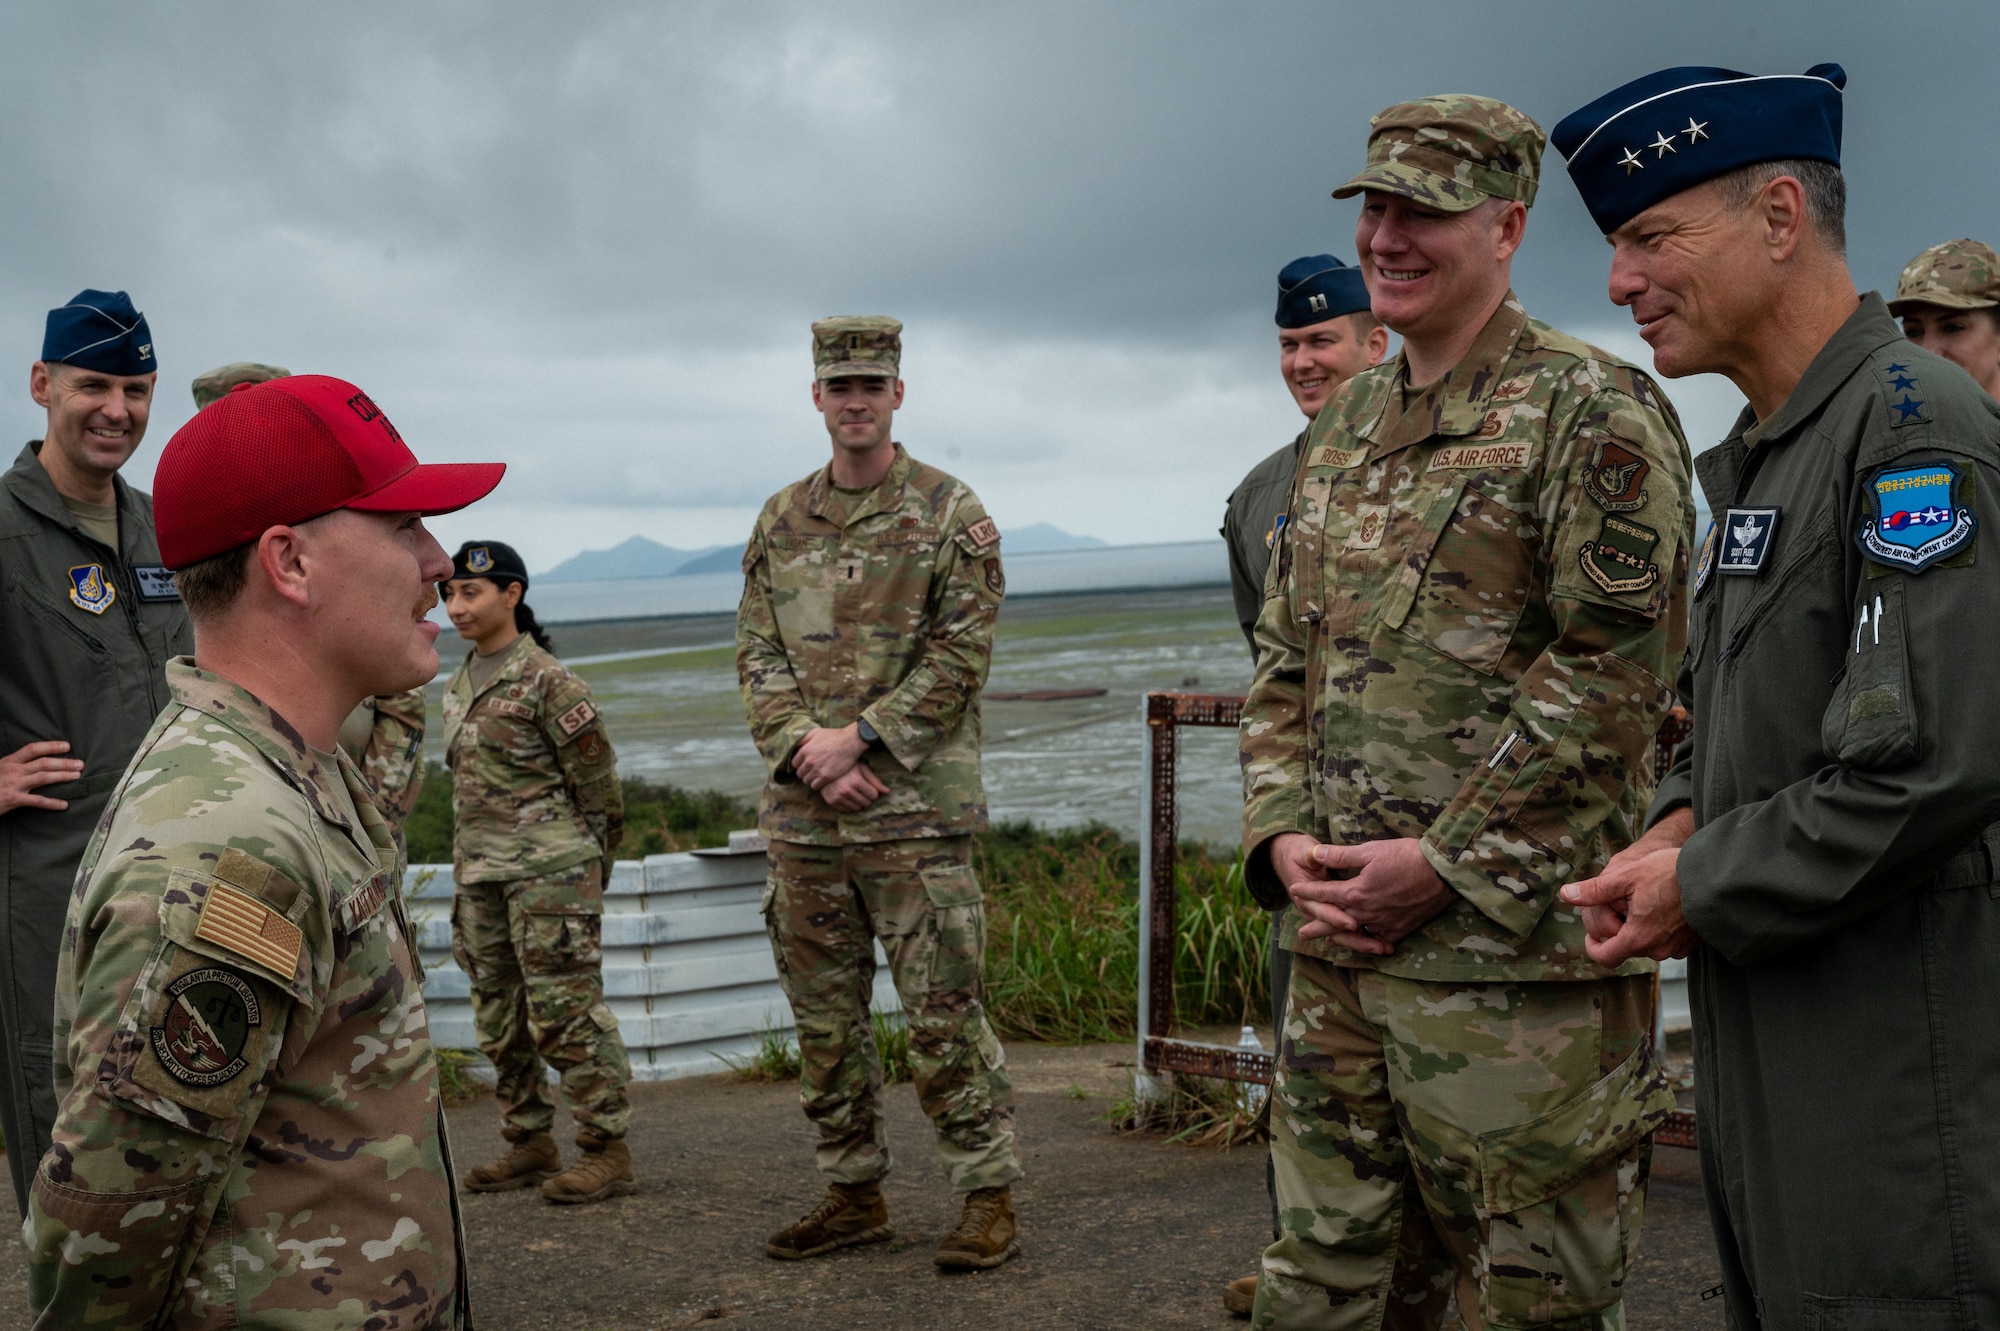 7th Air Force commander and command chief meet and speak with Airmen during mission immersion at Kunsan Air Base